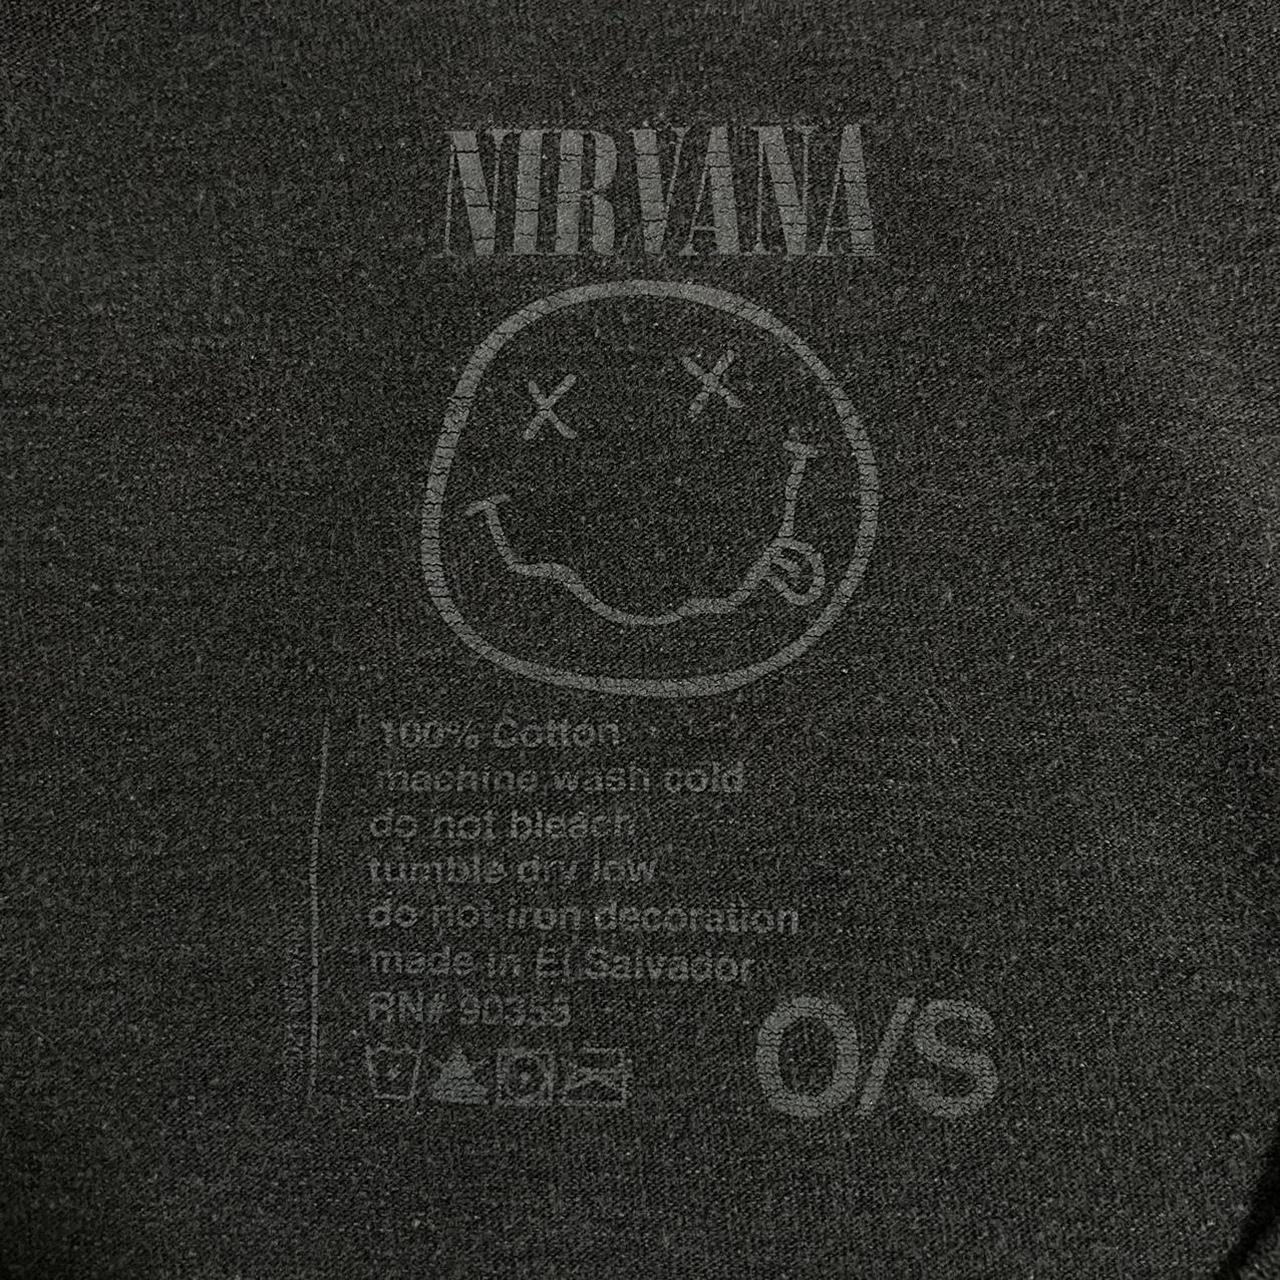 Product Image 4 - Modern Nirvana MTV Unplugged In